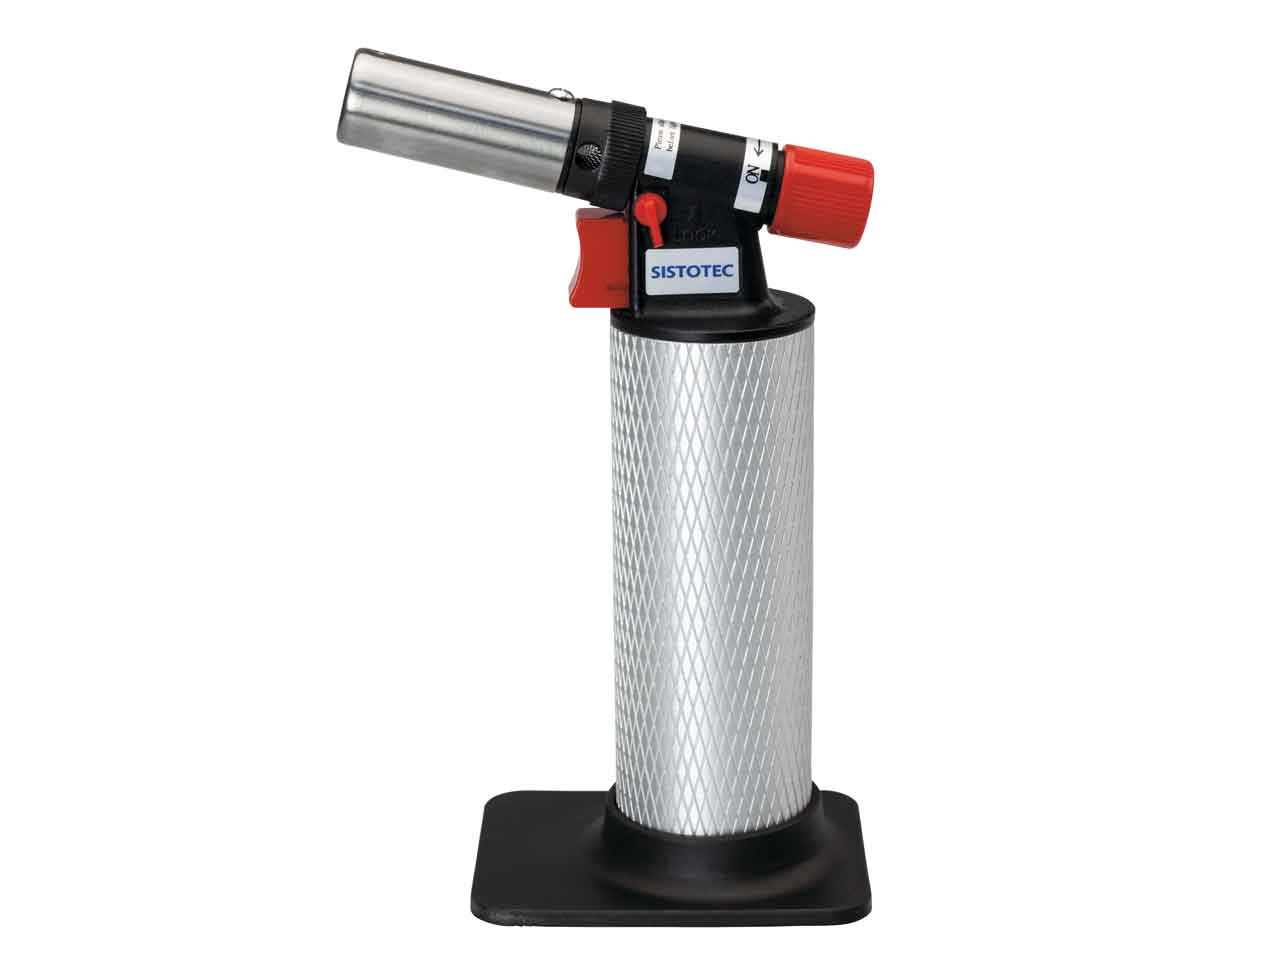 Max Flame Pro Hand Torch Butane